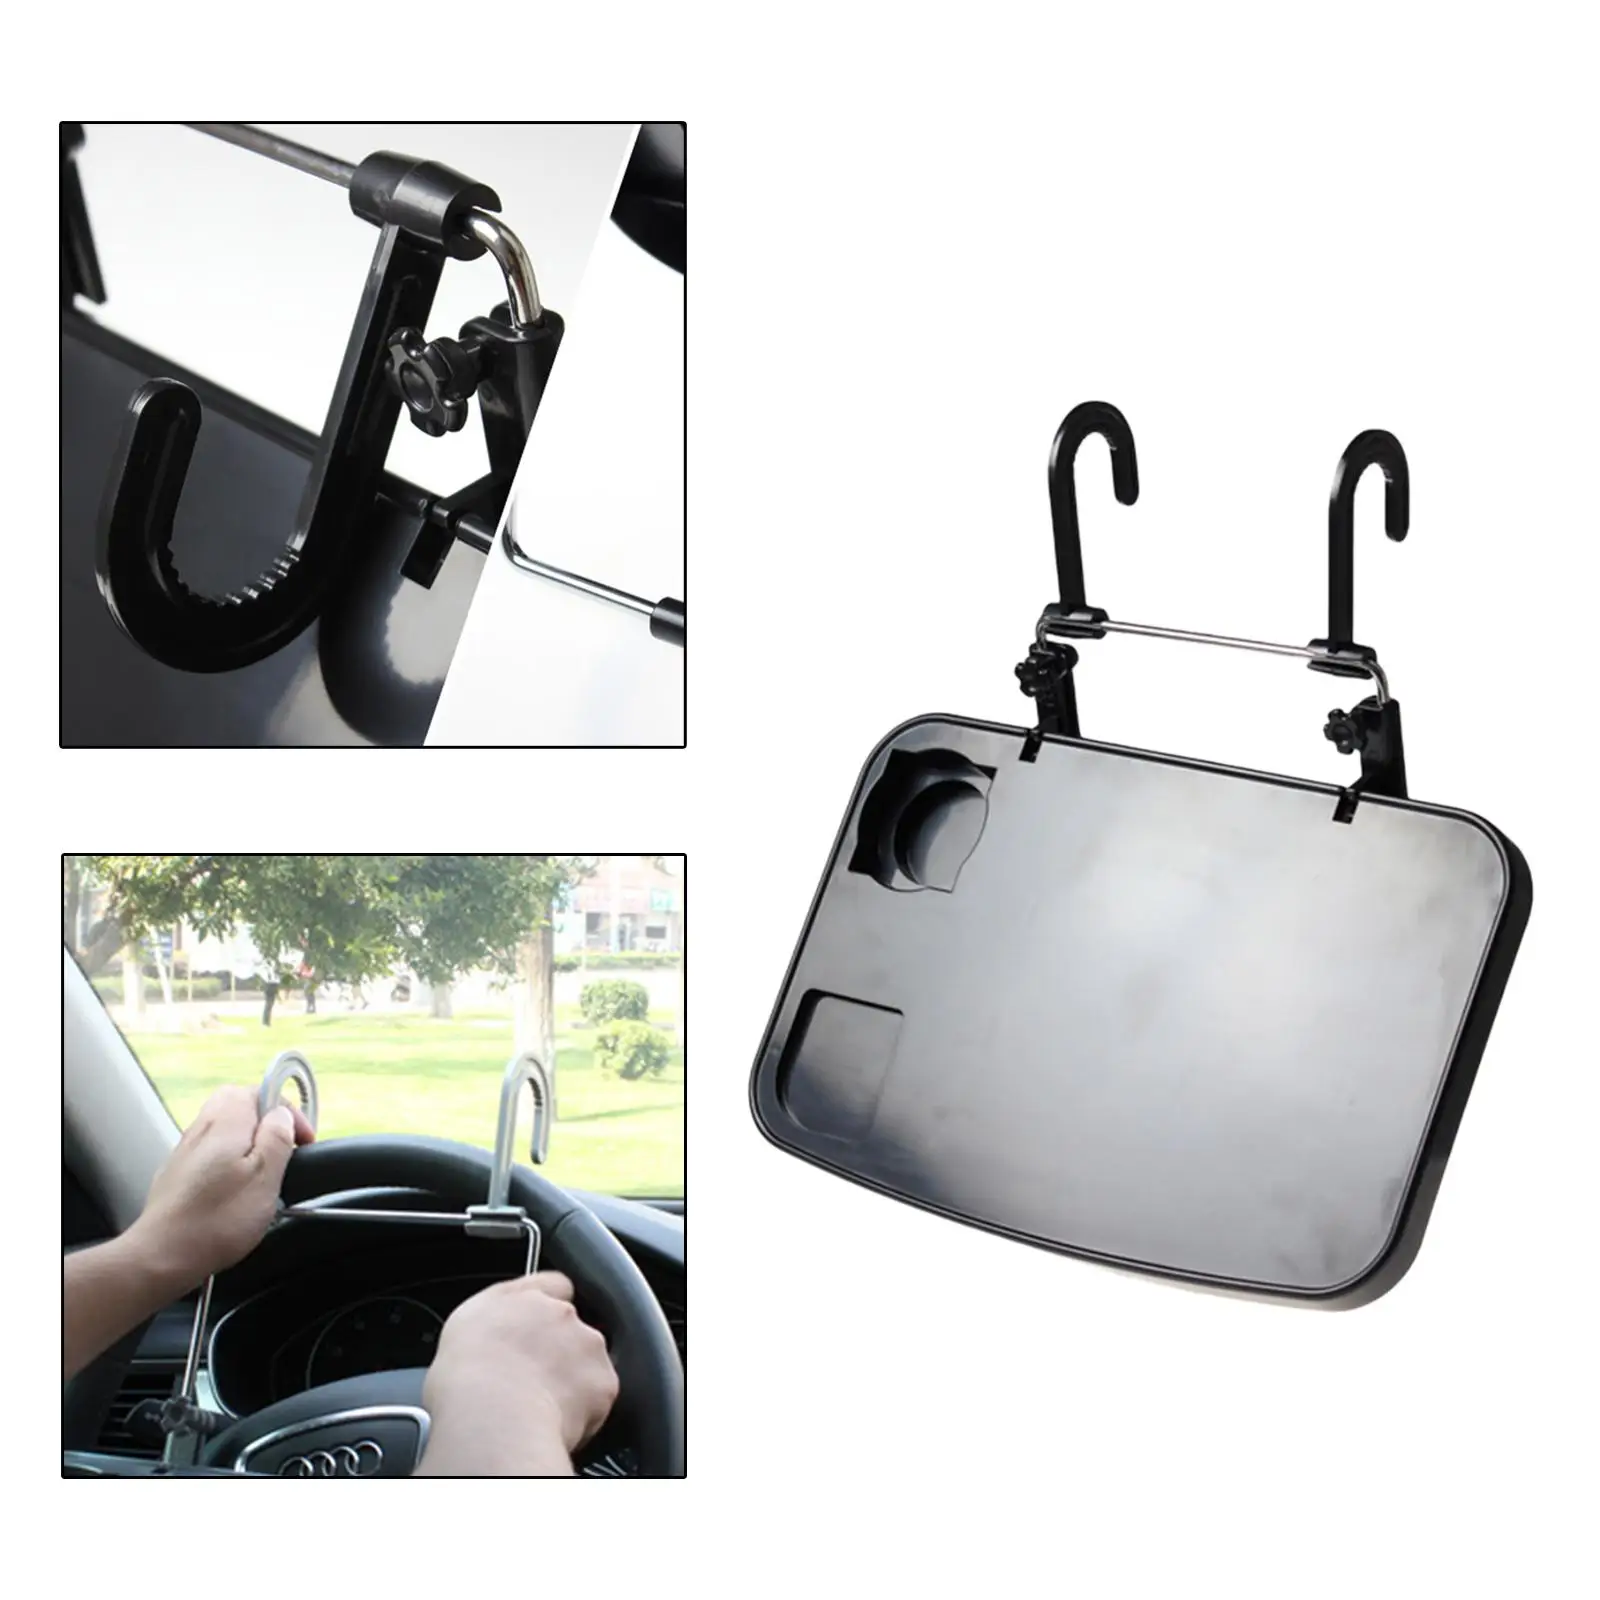 Car Computer Rack Car Steering Wheel Laptop Stand Shelf  for Notebook PC